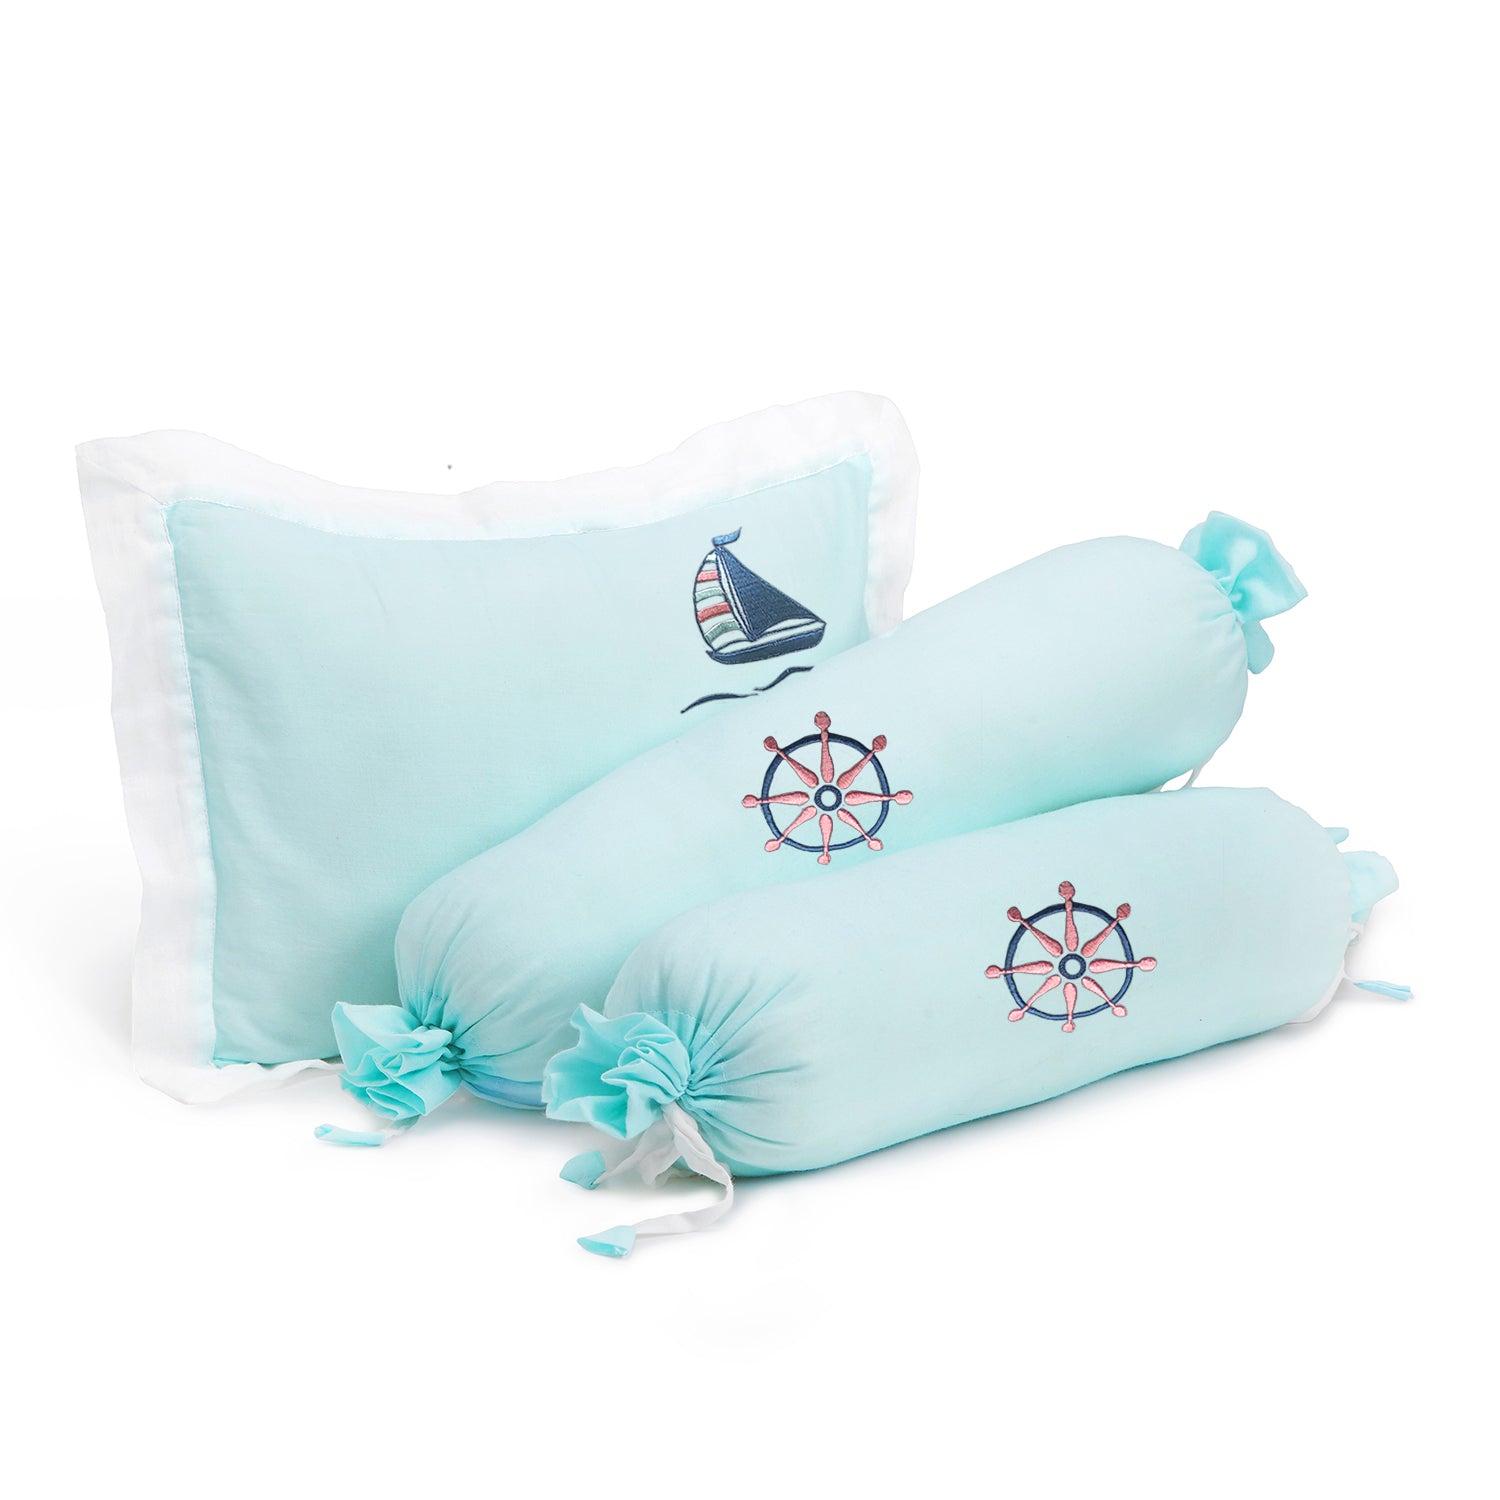 The White Cradle Cot Pillow + 2 Bolsters Set with Fillers - Organic Cotton Fabric, Softest Fiber Filling, Protective Comfort - Shipwheel